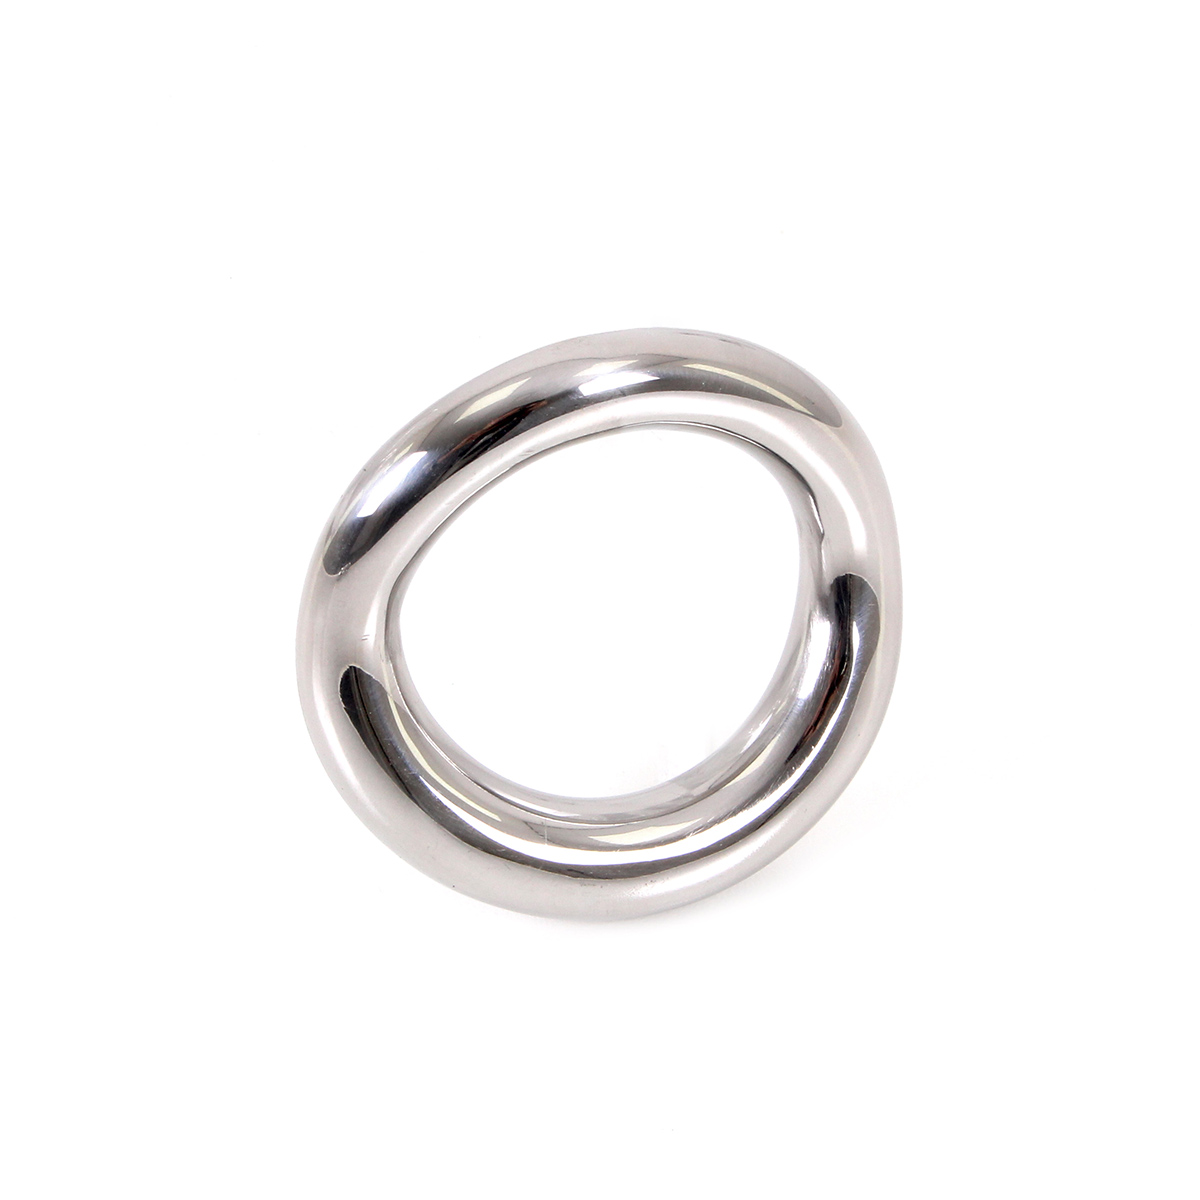 Costum-Fit-Cockring-45-mm-OPR-277045-2